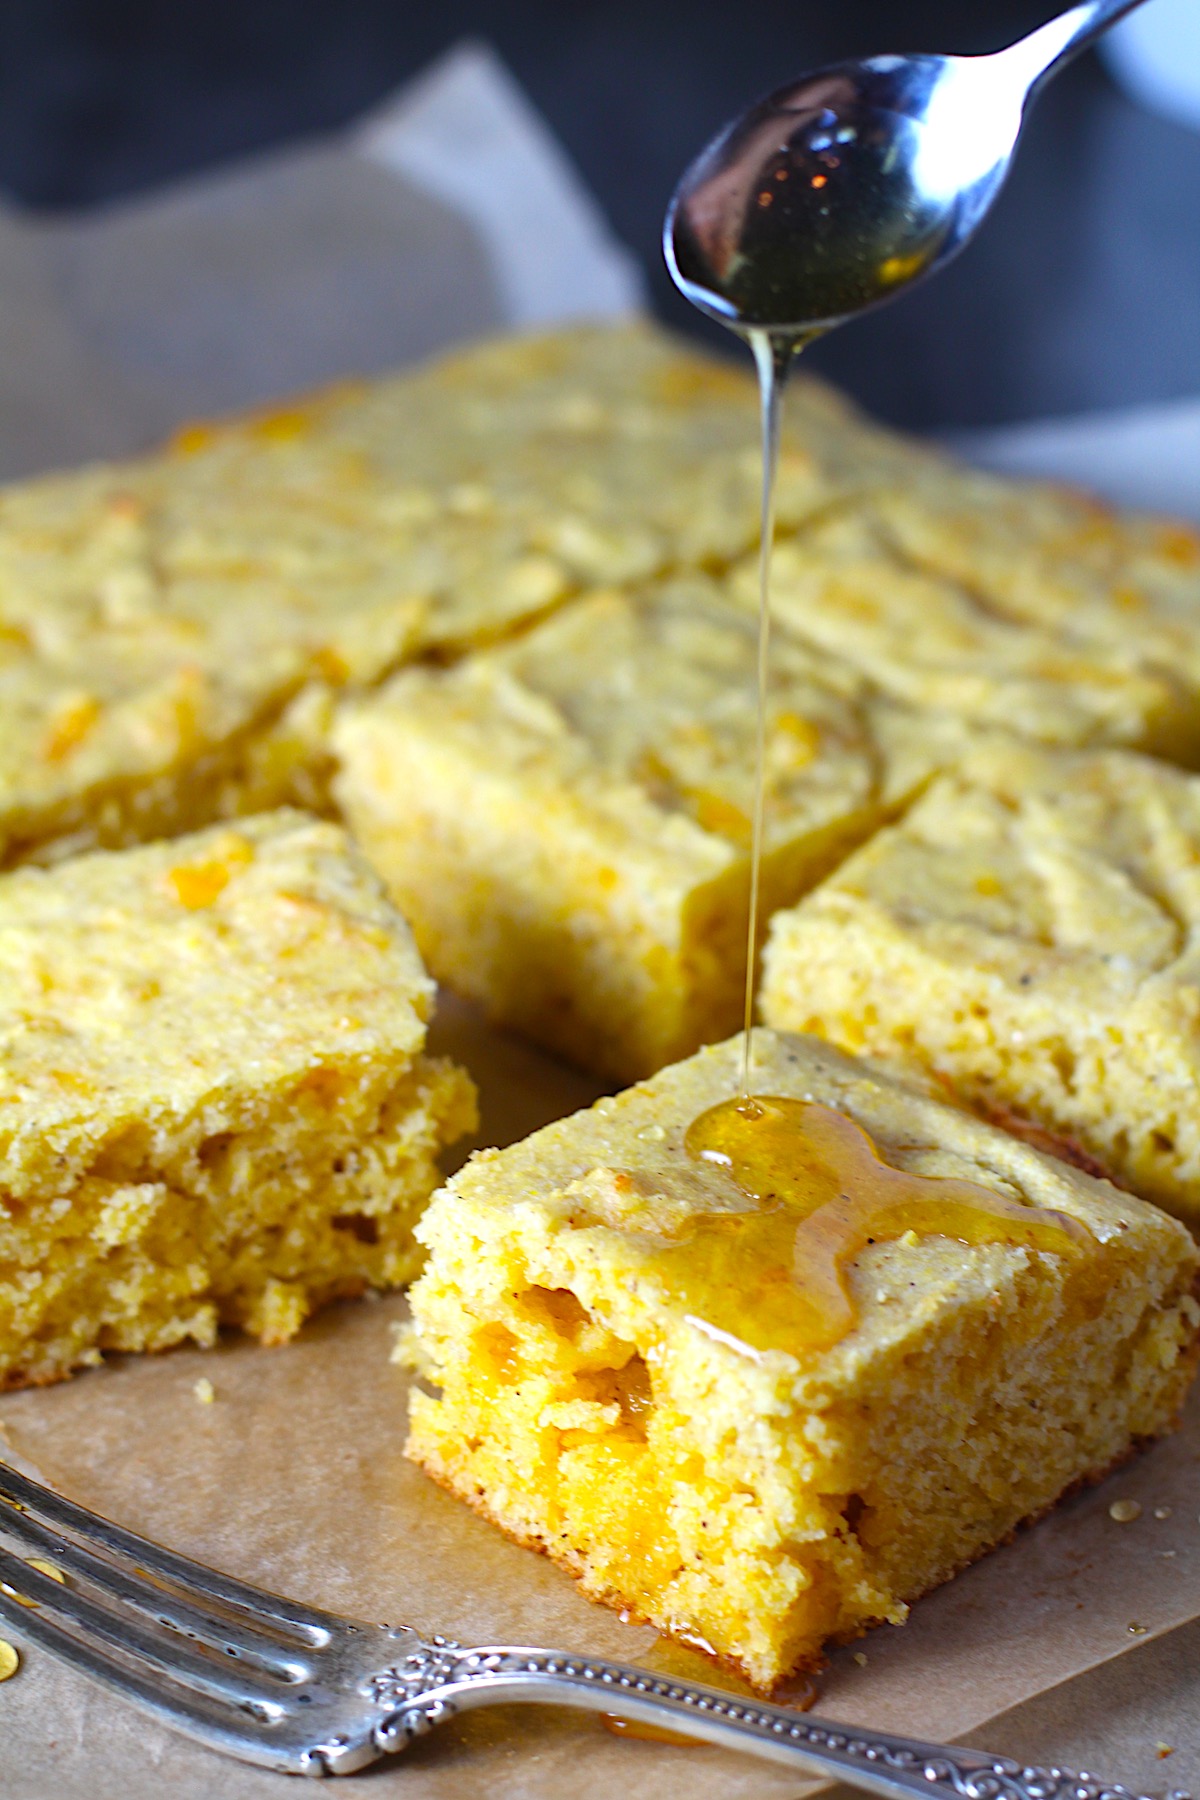 Cheddar Honey Glazed Cornbread pieces cut on parchment paper with honey being drizzled on top and fork and crumbs around.